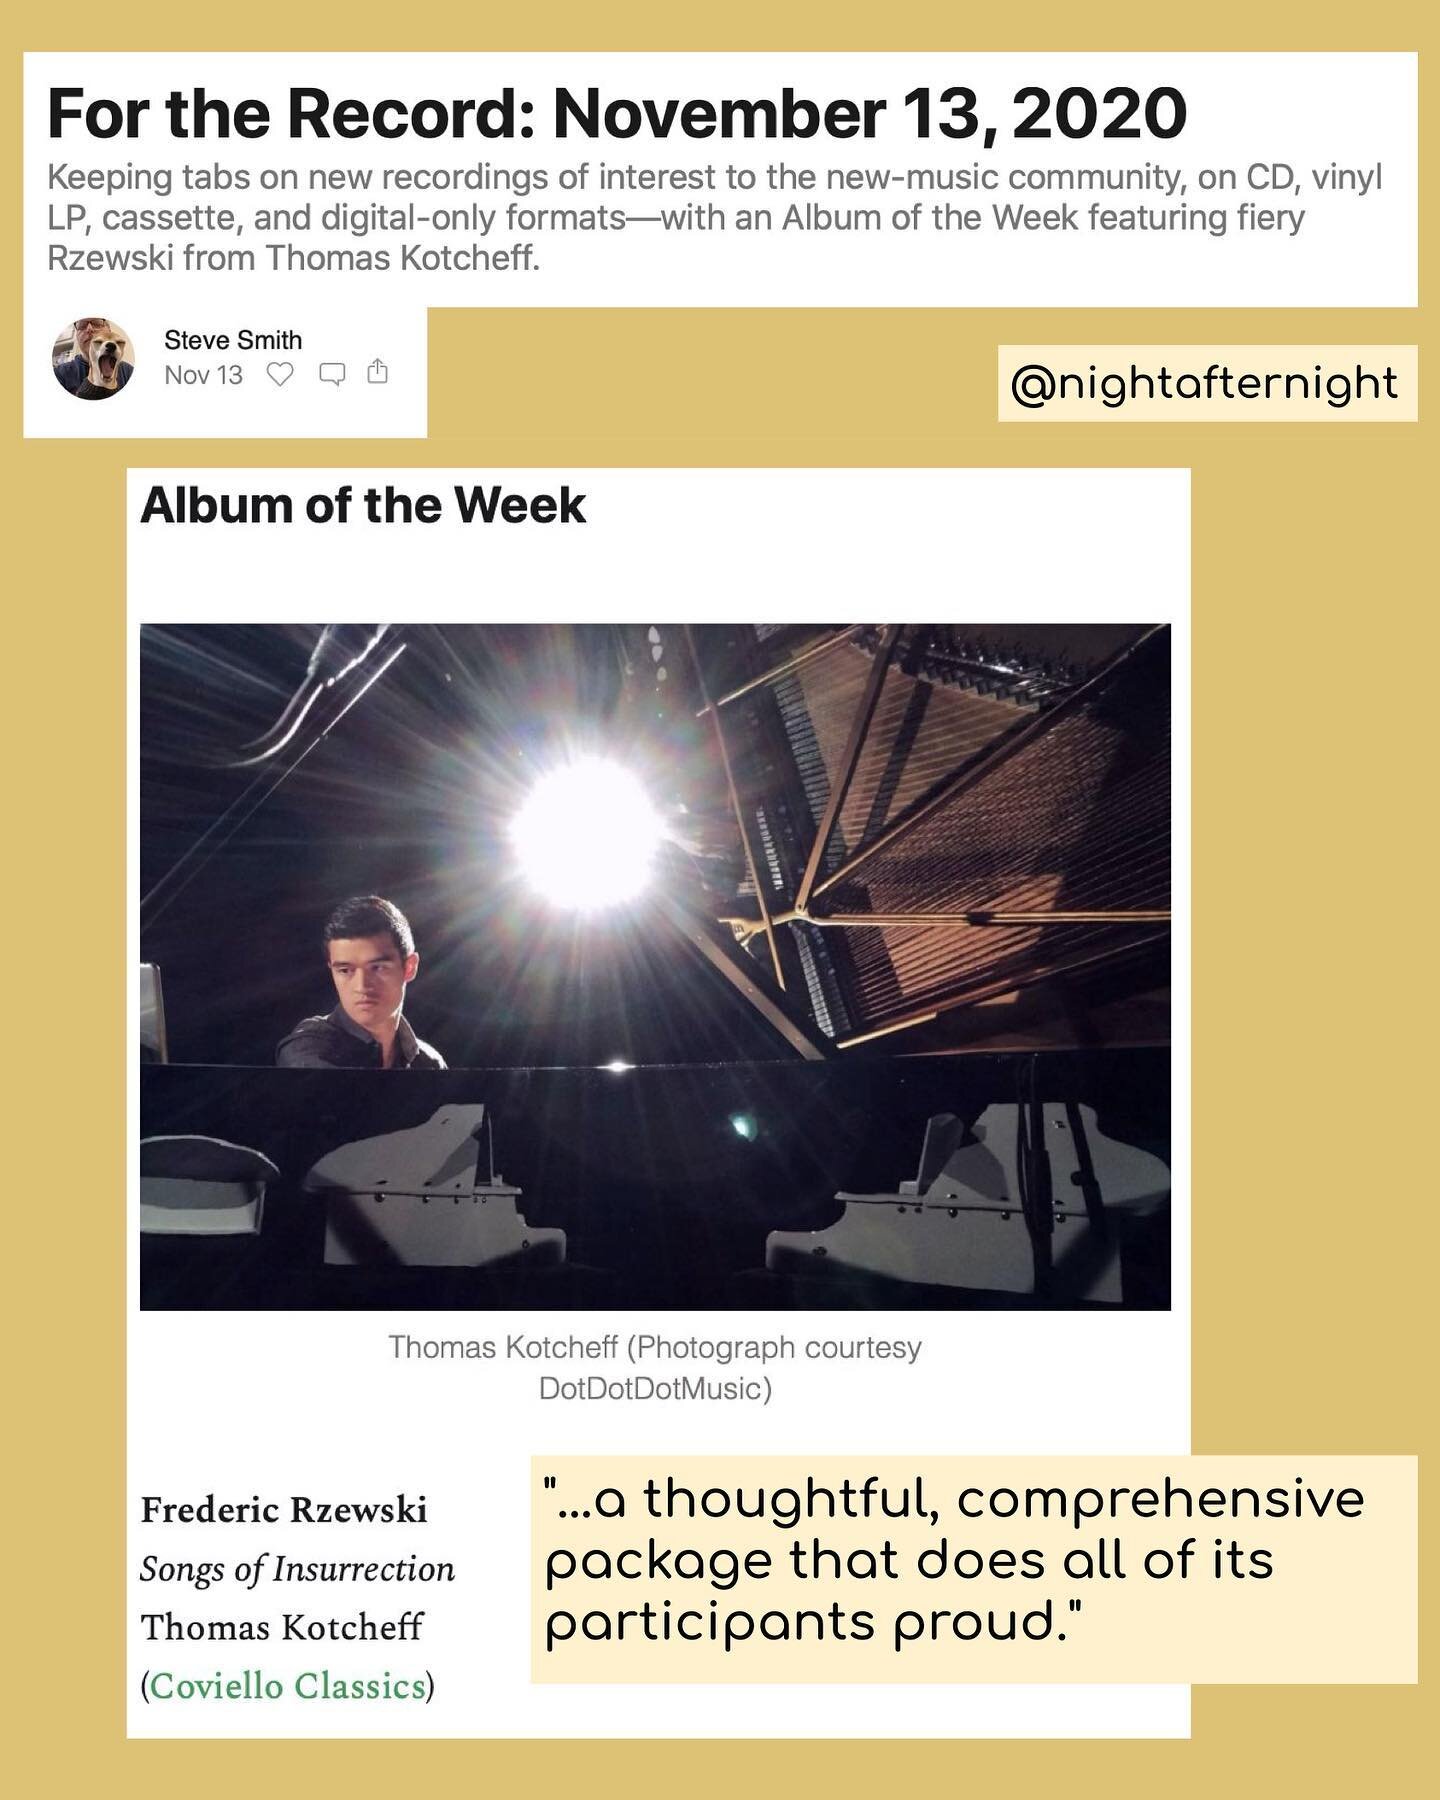 &ldquo;Songs of Insurrection&rdquo; 💽 chosen by @niteafternite as Album of the Week! Thank you Steve! 🌟 Link to listen to the album in profile! 🎉